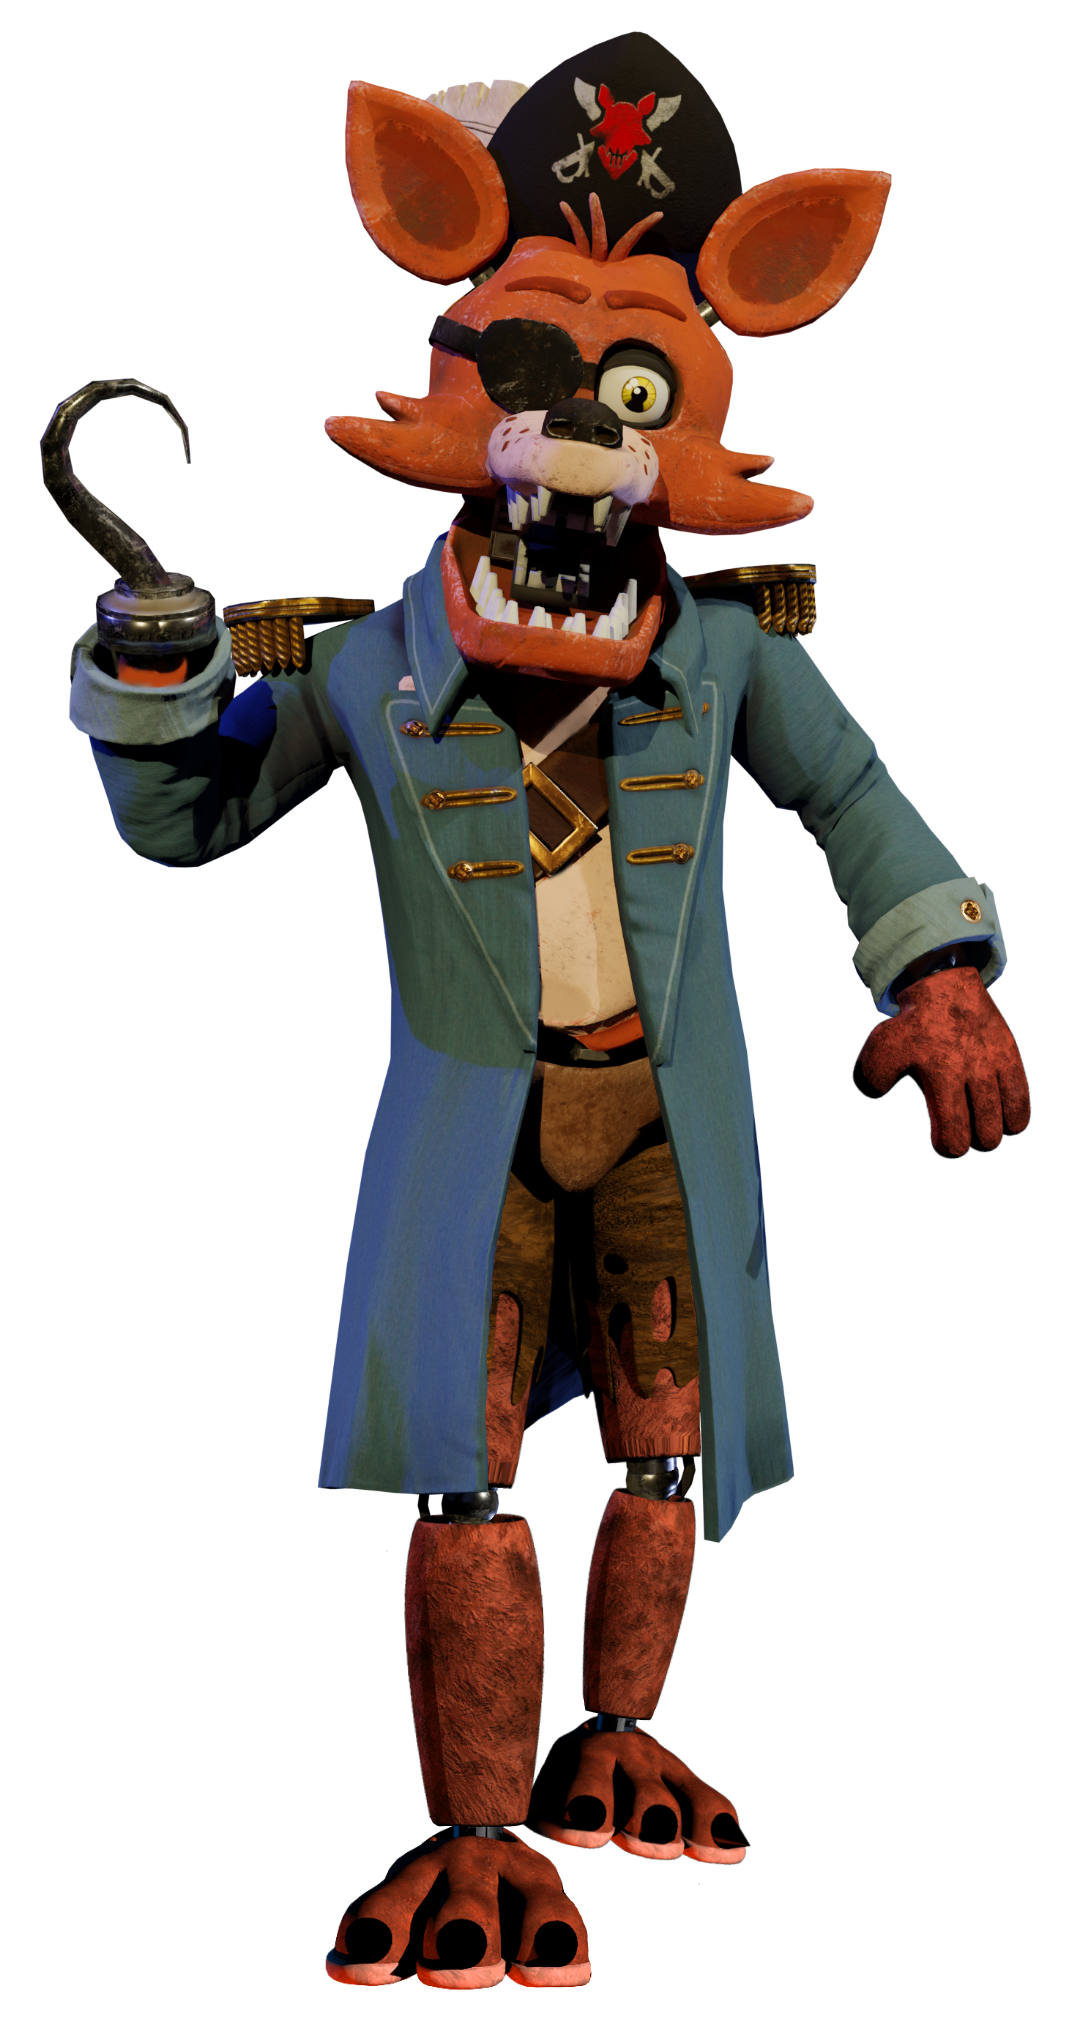 MMD- Withered Foxy by OscartheChinchilla on DeviantArt